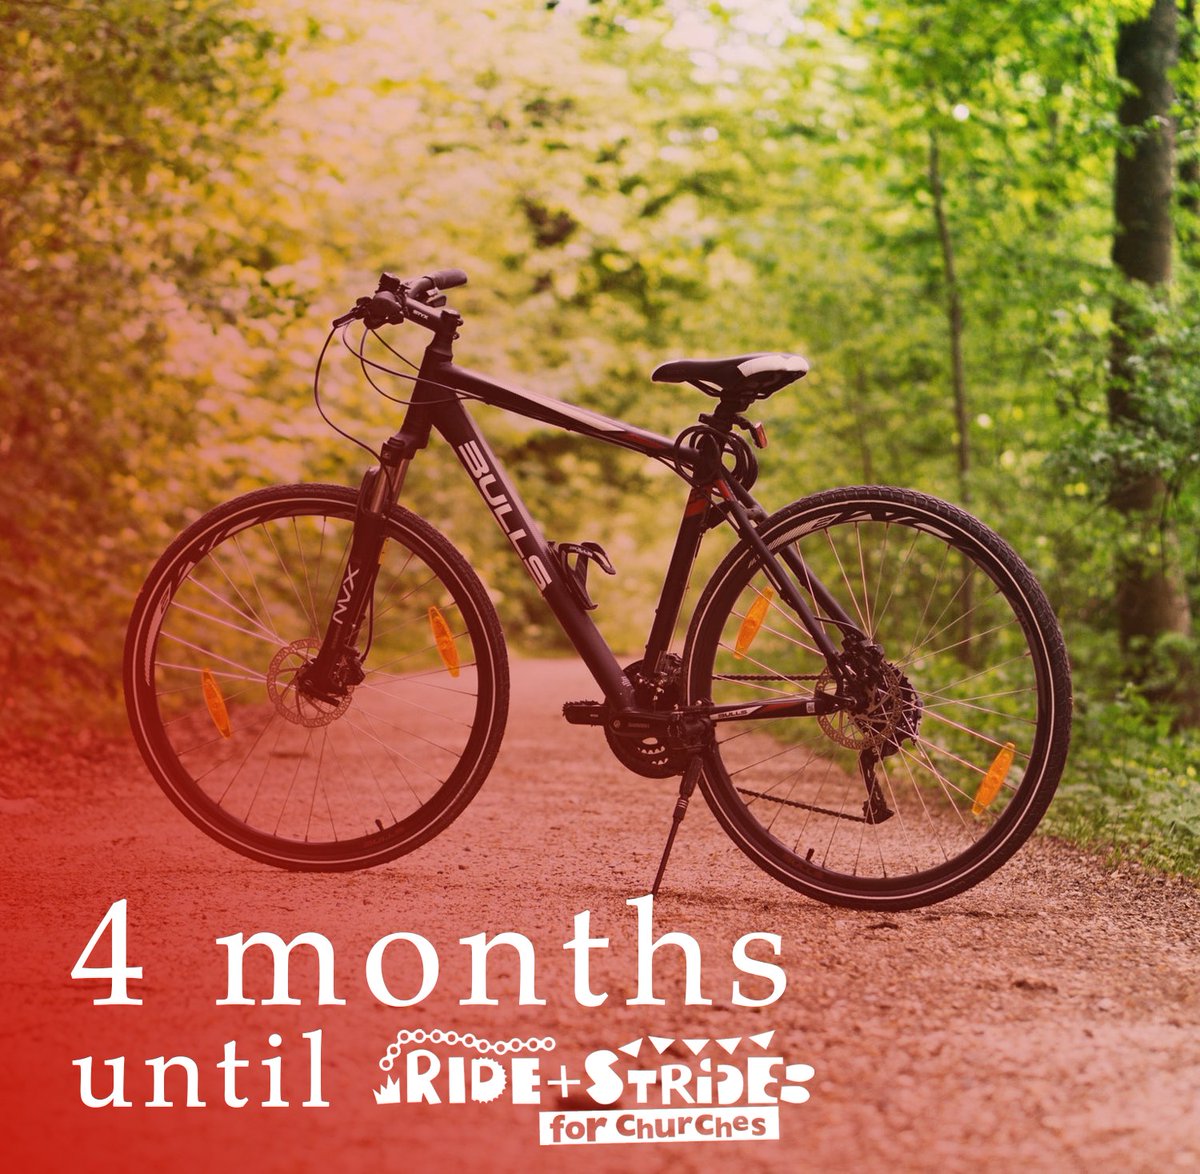 That's right, the countdown is on! It's now just 4 months until September and that means just 4 months until Ride + Stride 🙌 Which churches are you hoping to visit this year? #church #explorechurches #explorebritain #history #gloucestershire #visitchurches #heritage